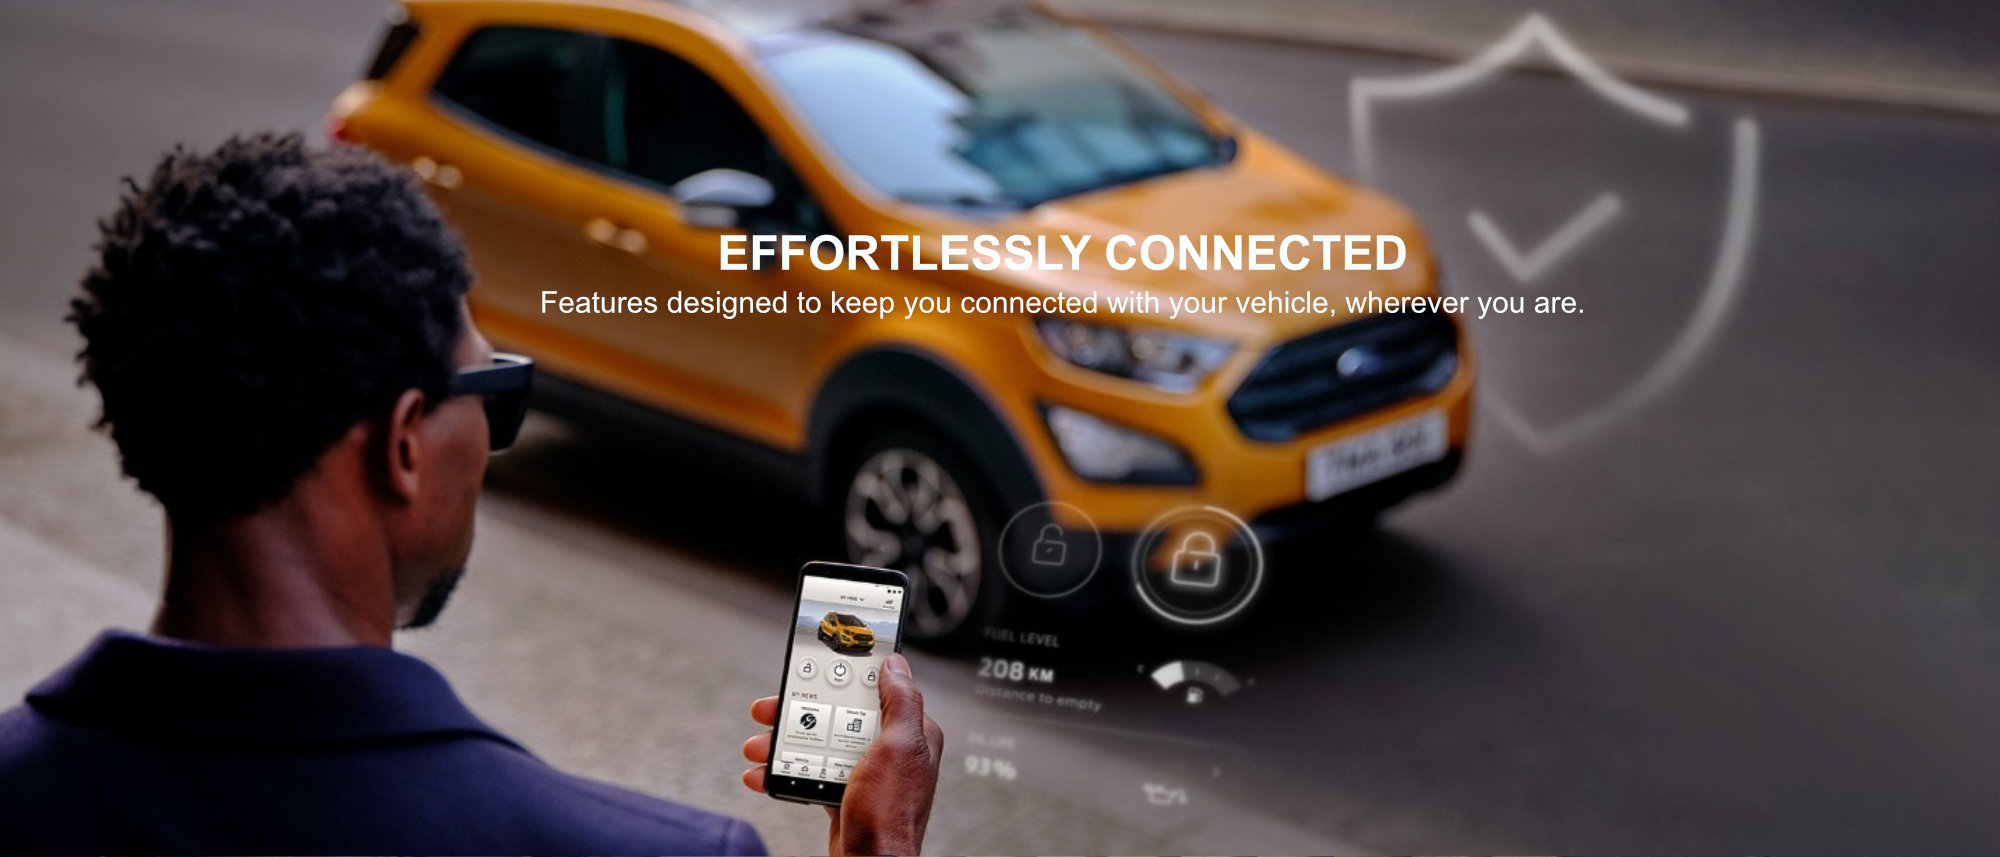 FordPass effortlessly connected